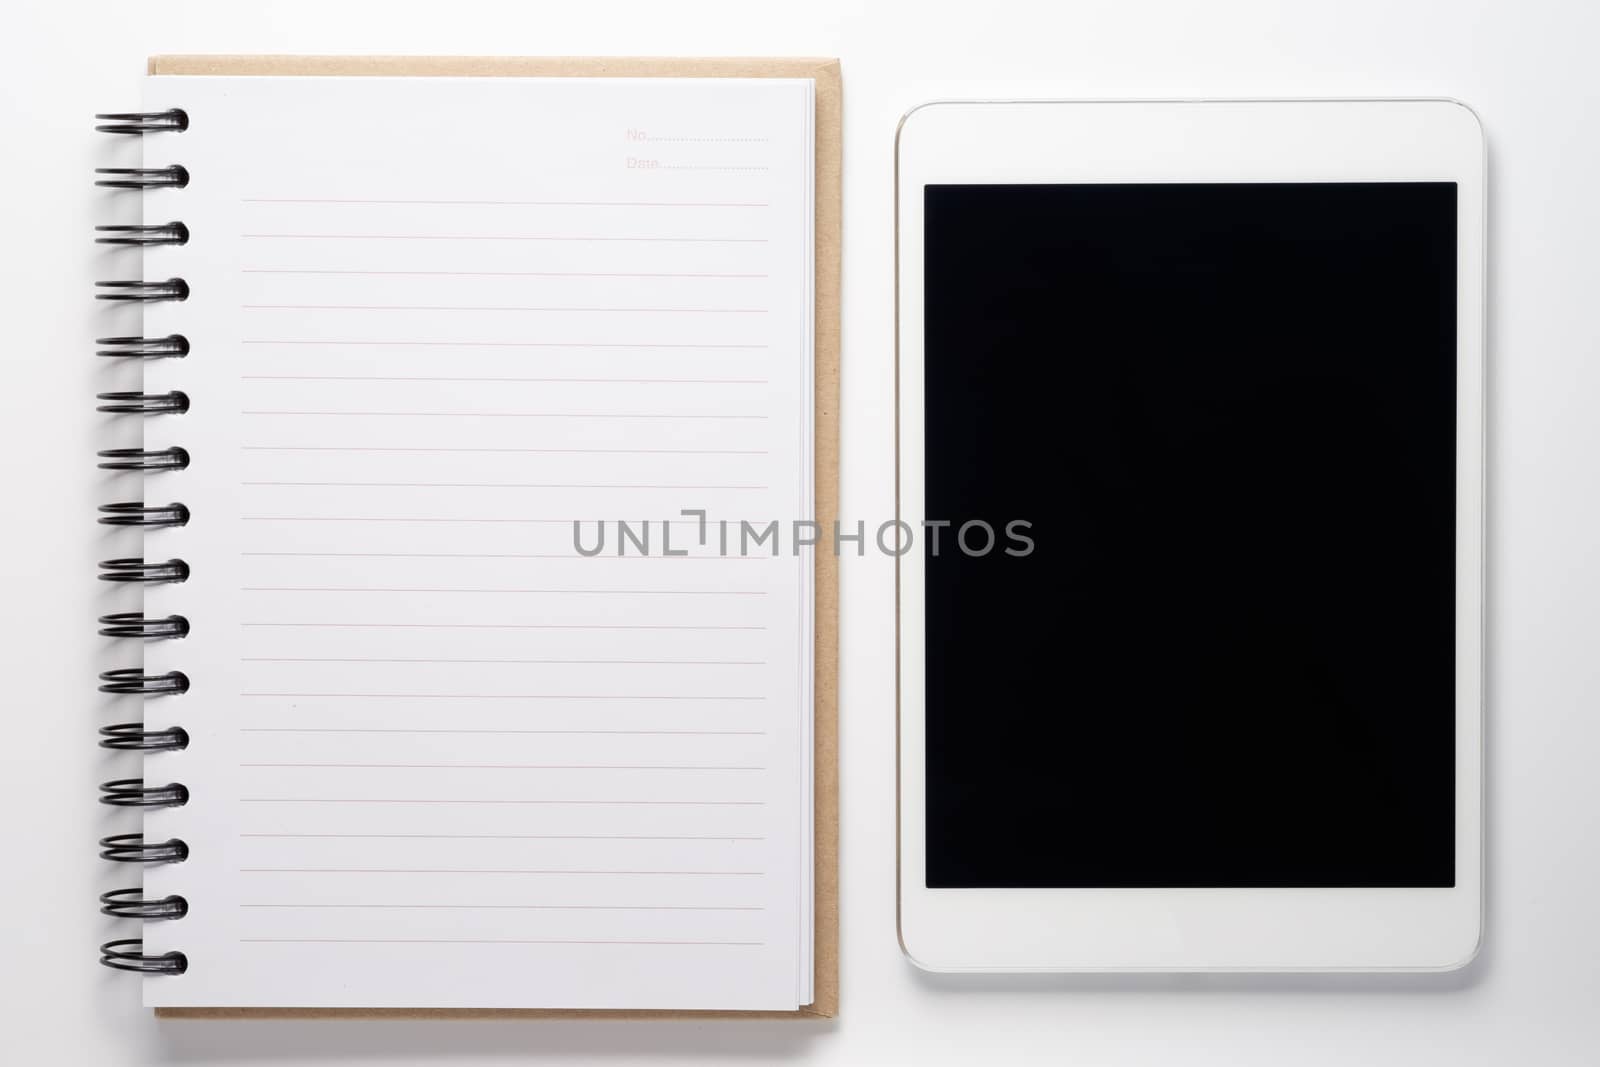 Notebook and tablet on white background.